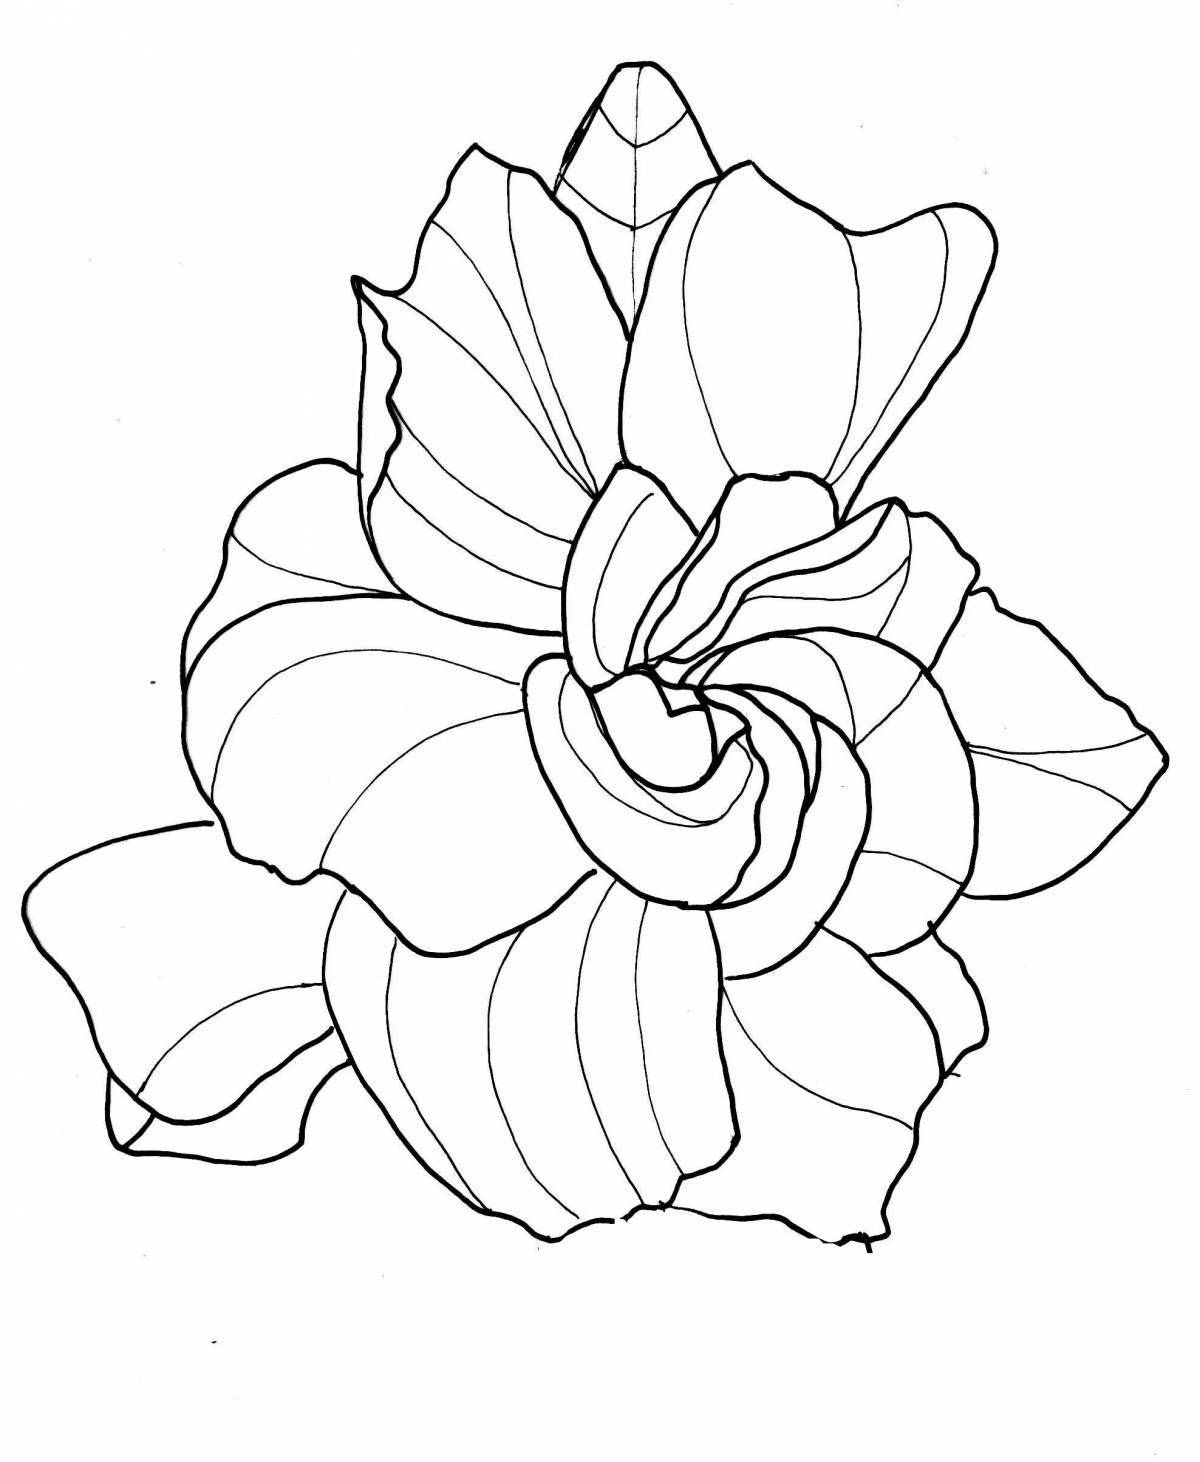 Playful stone flower coloring page for kids